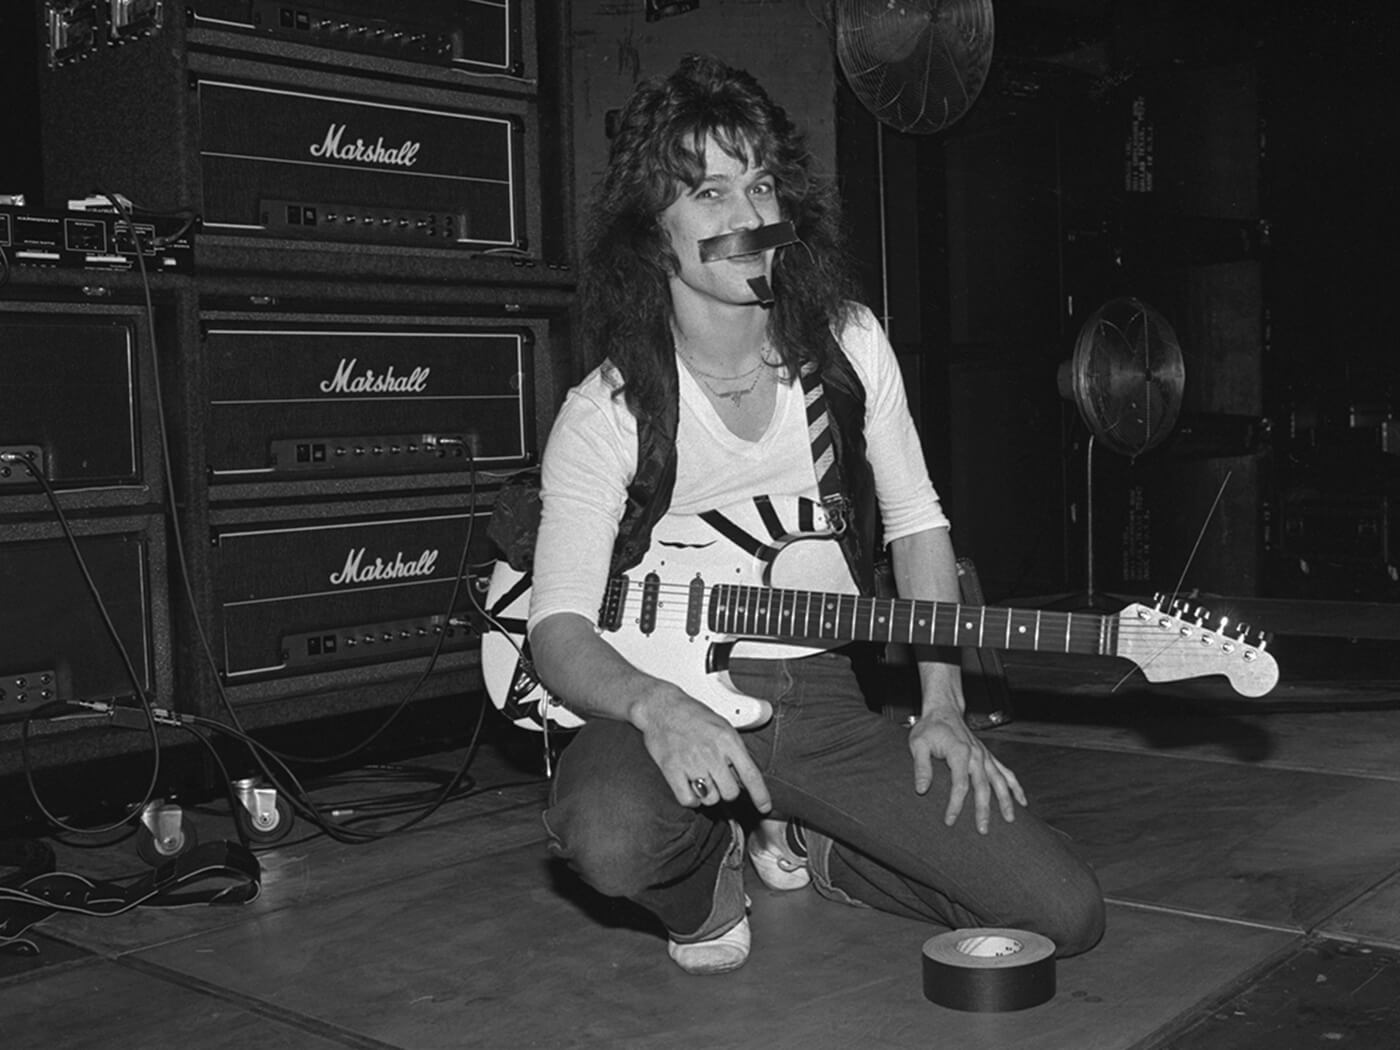 Eddie Van Halen photographed before a stack of Marshall amplifiers in 1978, photo by Lynn Goldsmith/Corbis/VCG via Getty Images